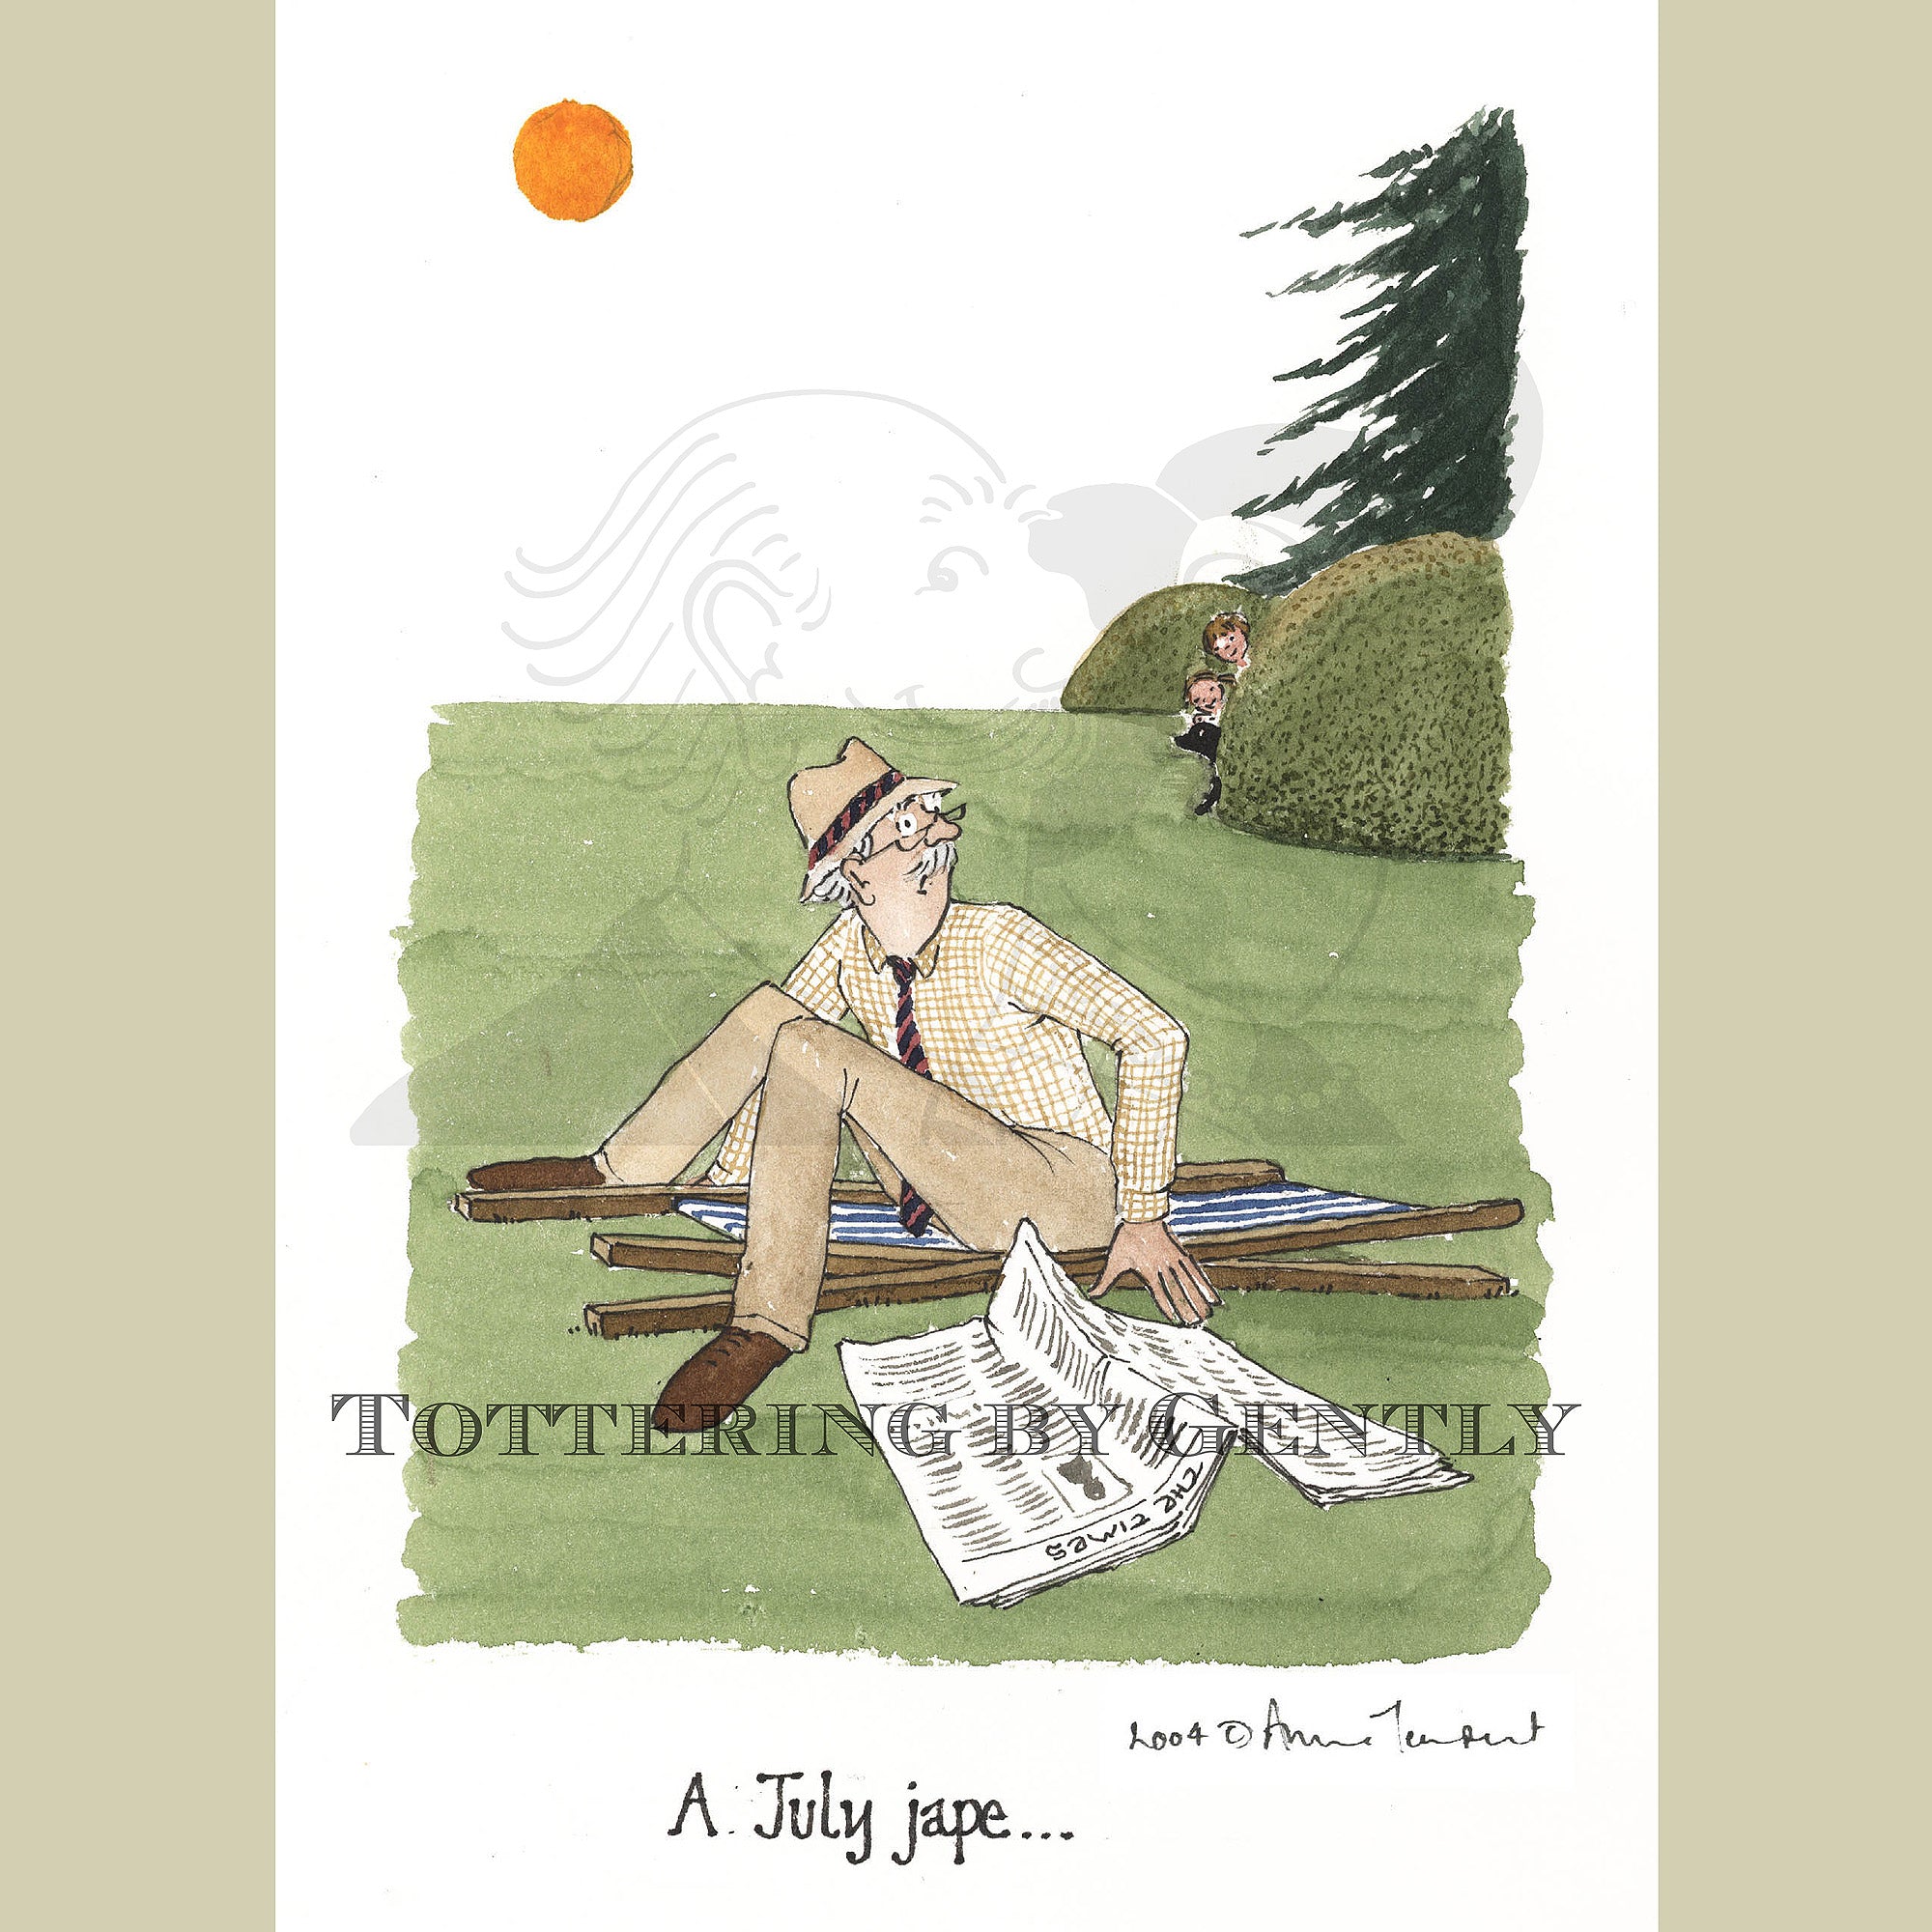 The Tottering Year : A July jape... (S259G)